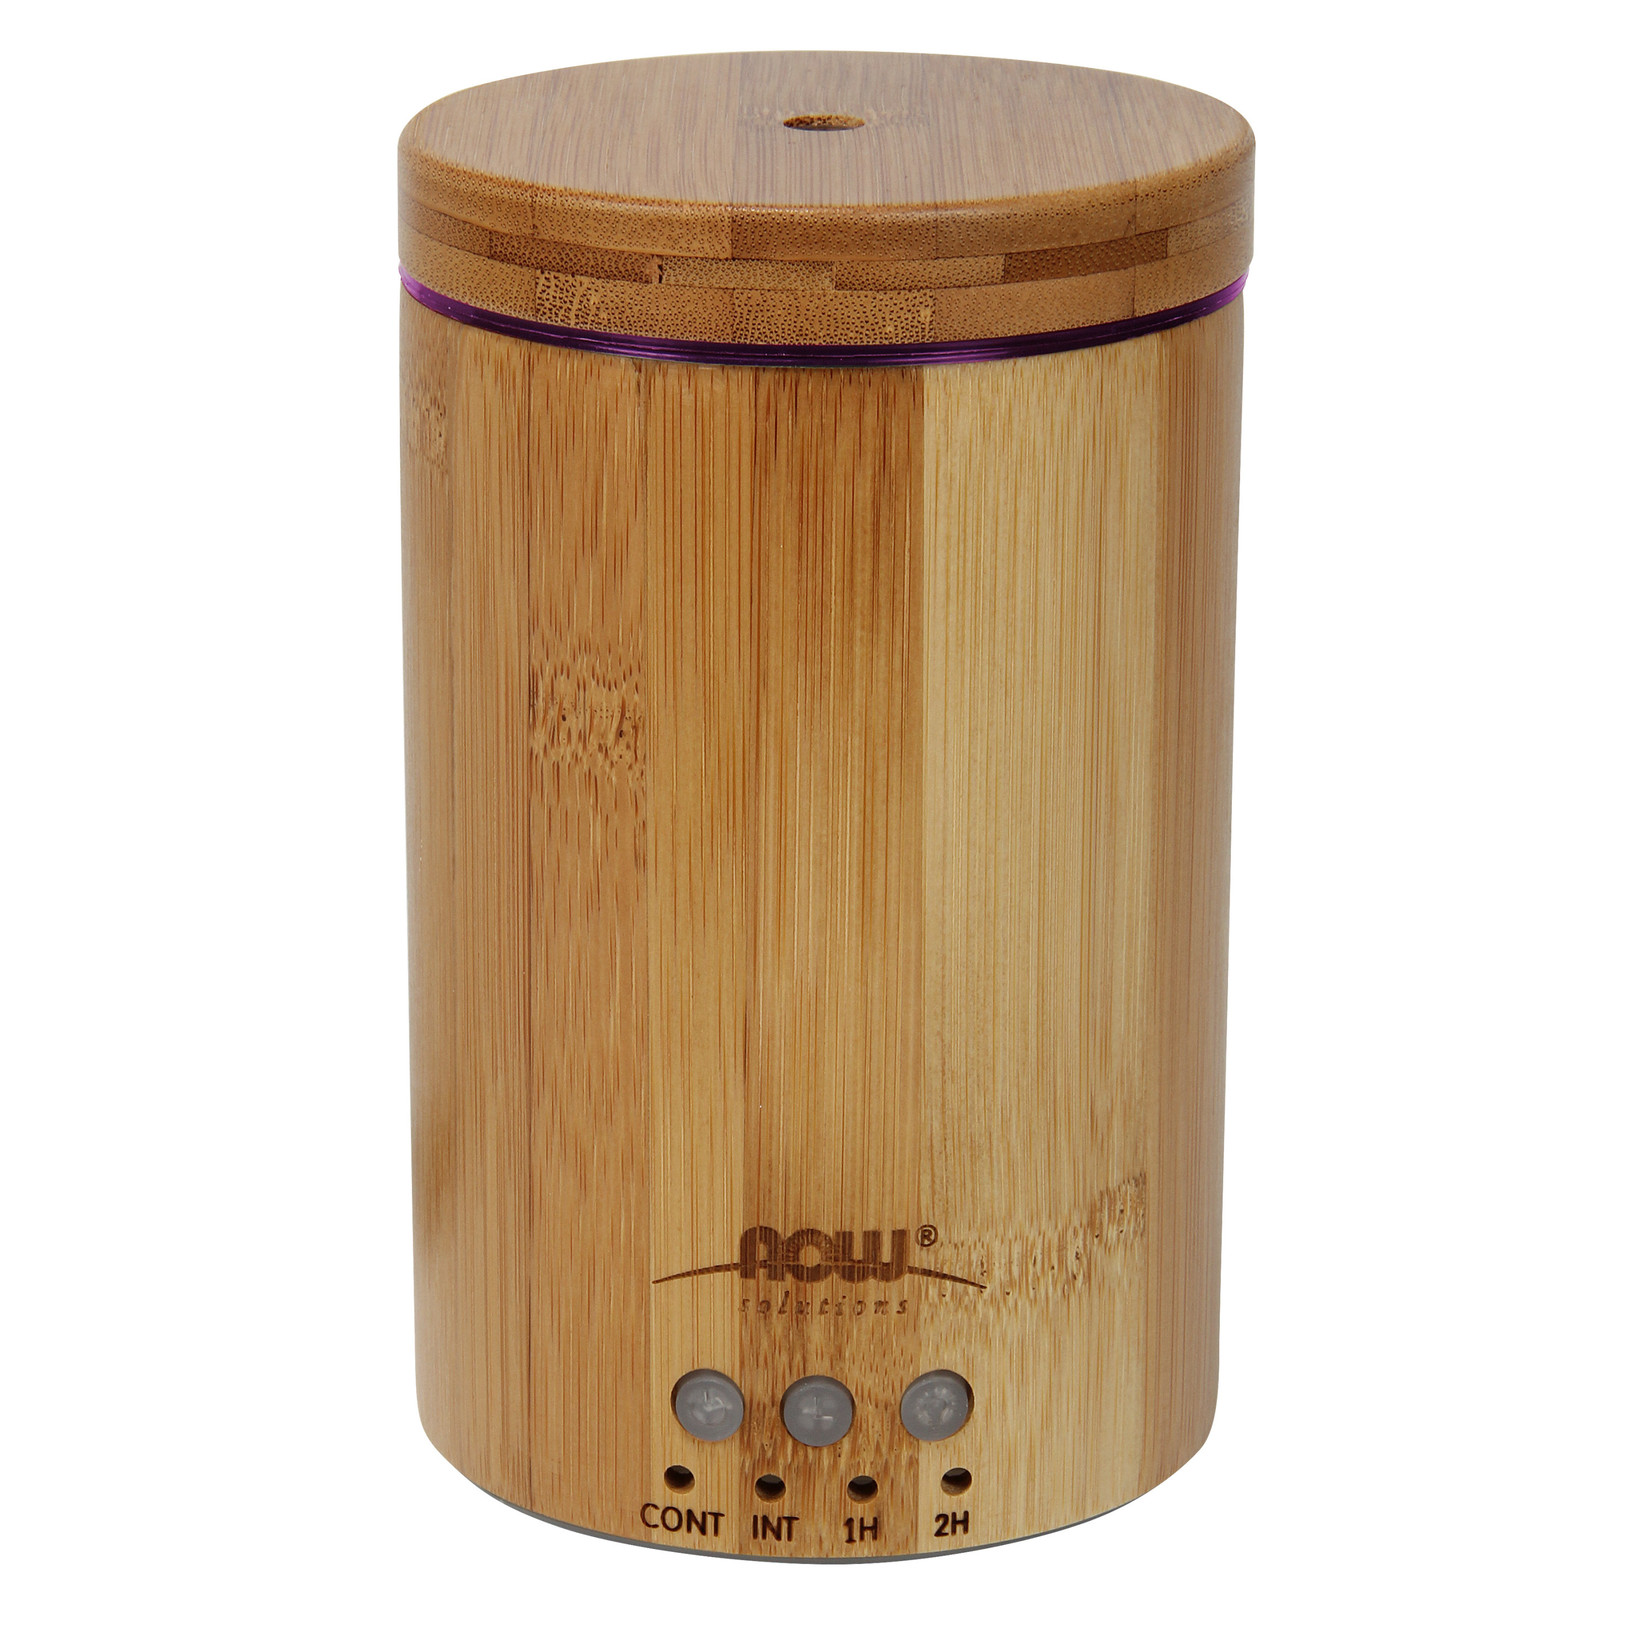 Now Now - Real Bamboo Ultrasonic Oil Diffuser